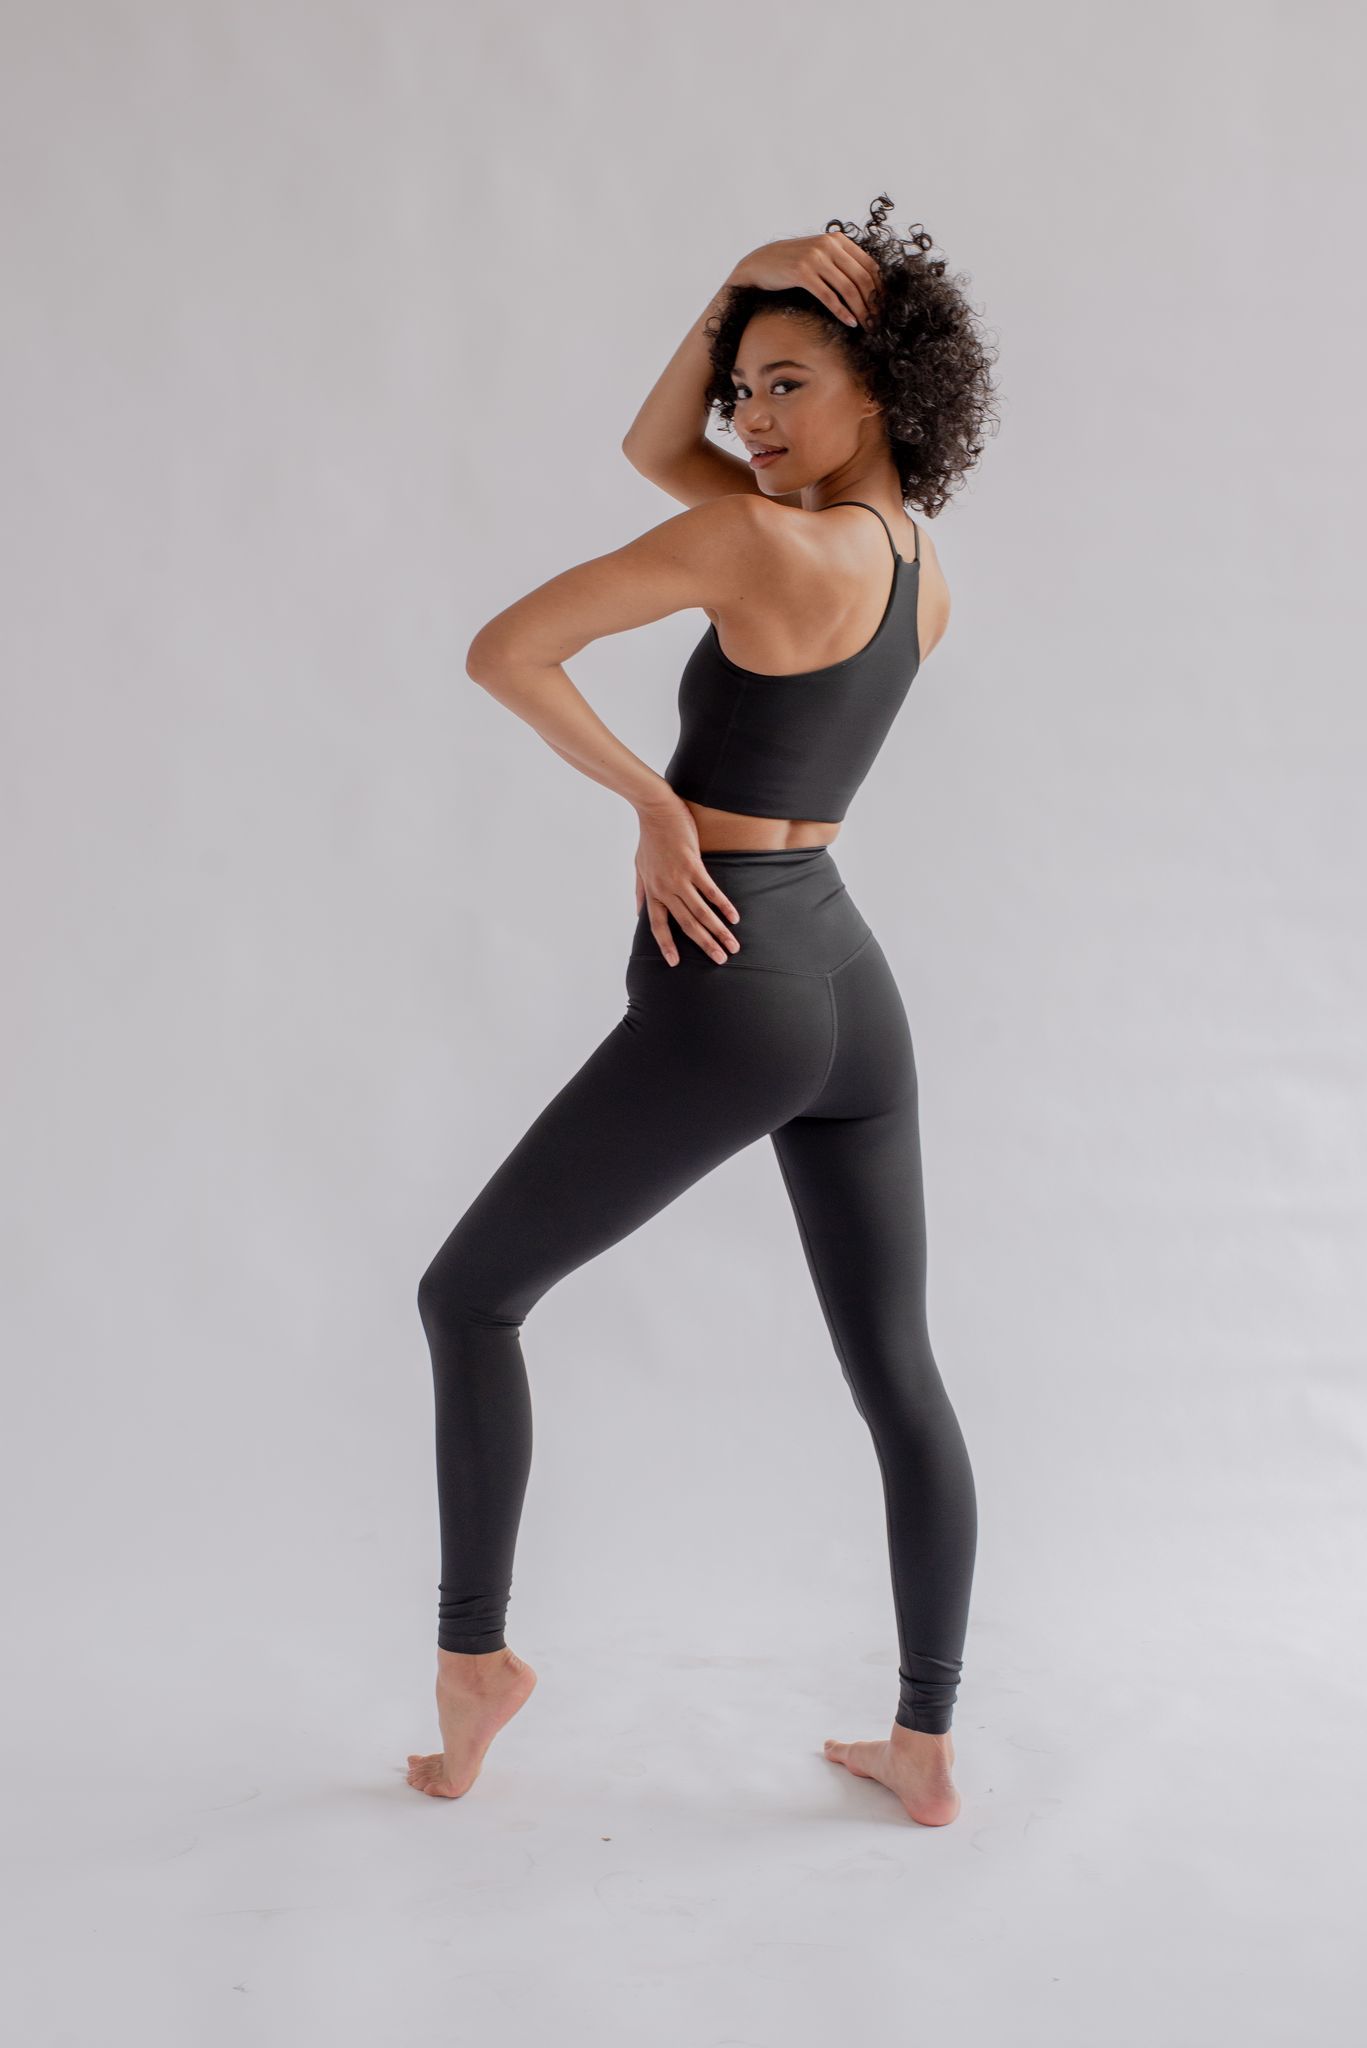 Girlfriend Collective W's Float High-Rise Legging - Made from Recycled plastic bottles Black Pants